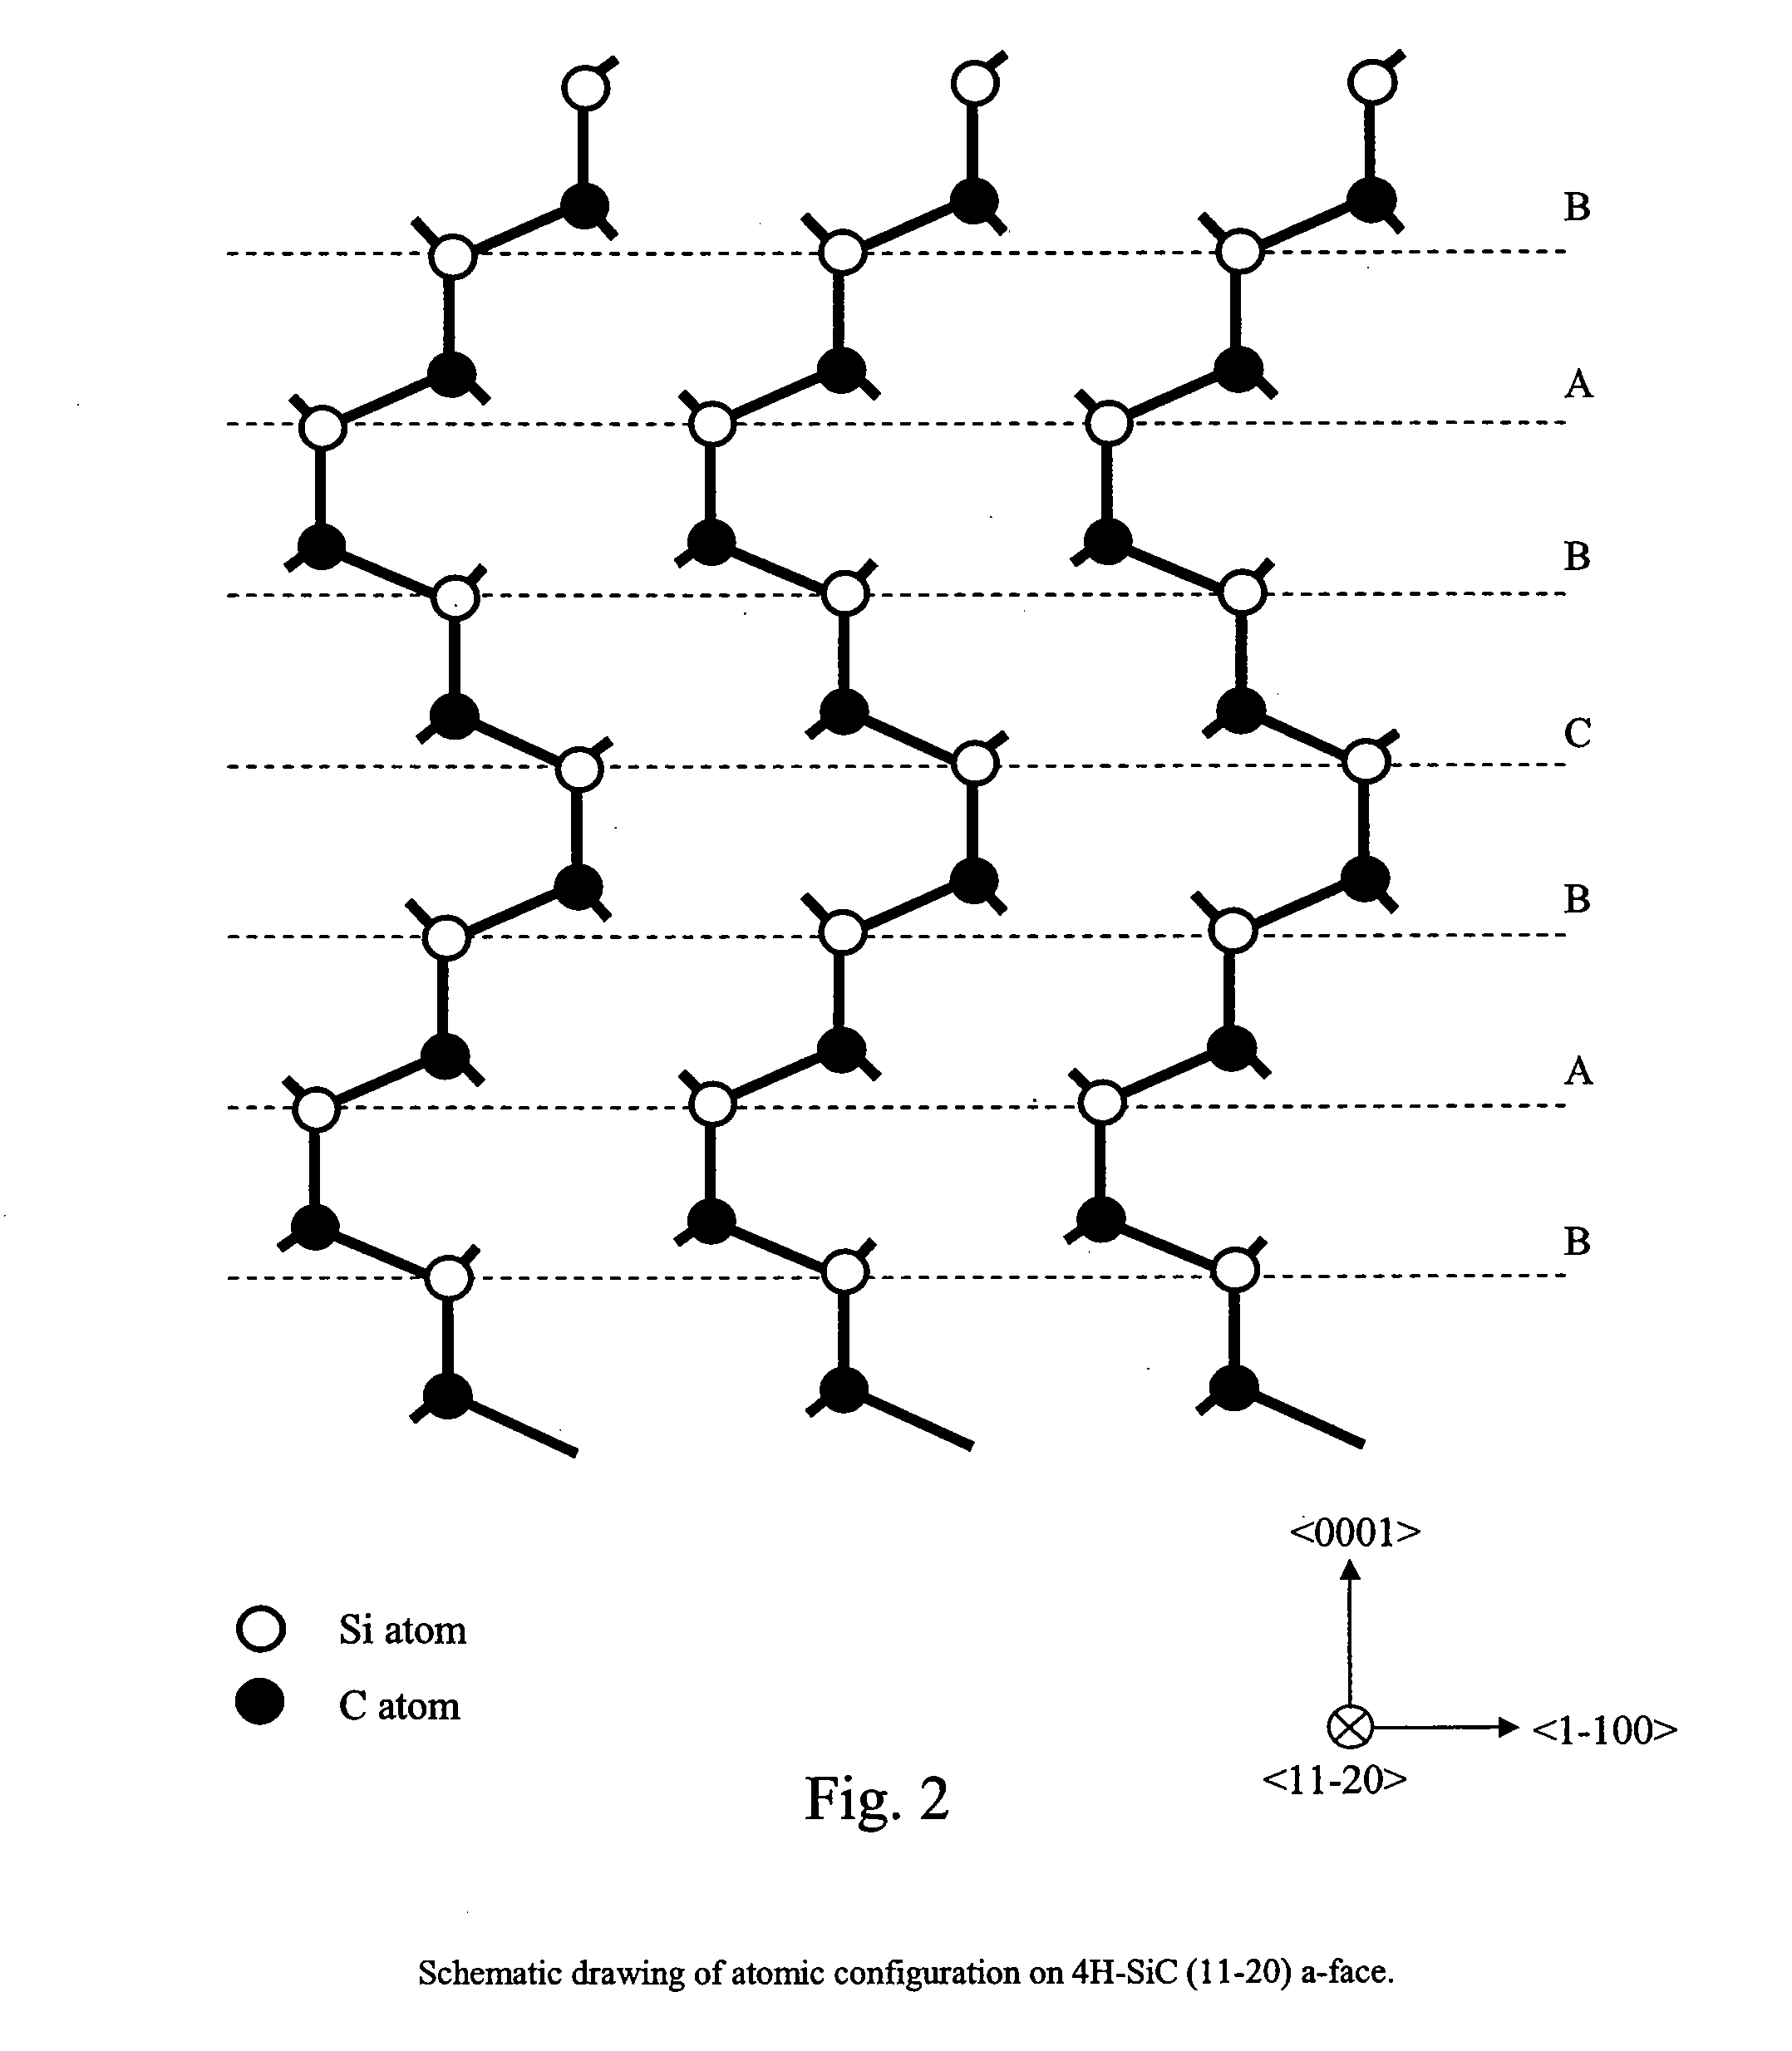 4h-polytype gallium nitride-based semiconductor device on a 4h-polytype substrate